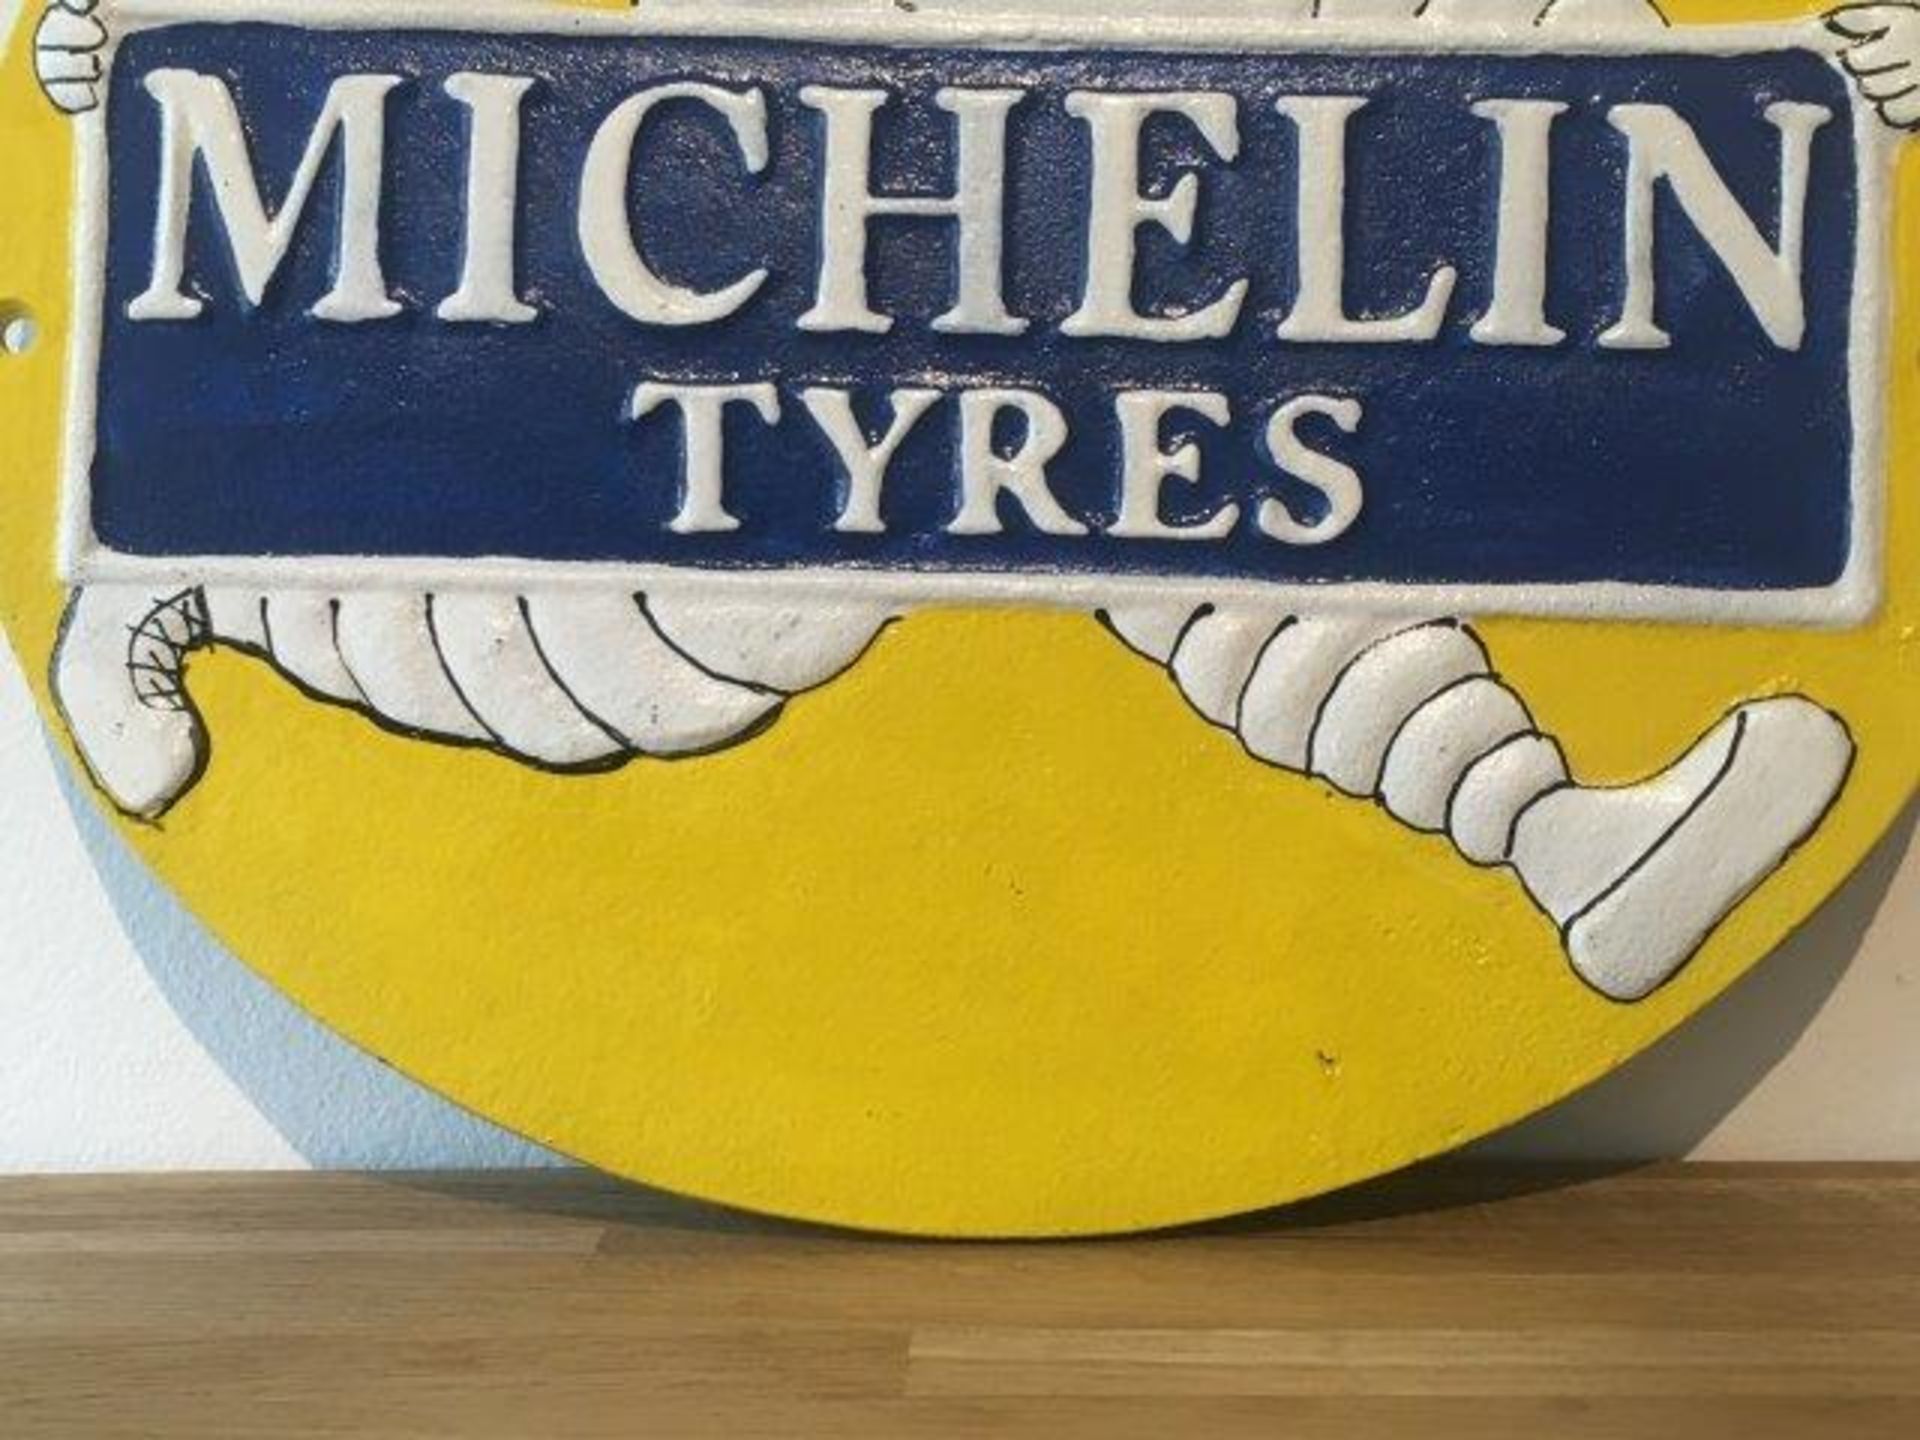 Michelin Tyres Cast Iron Sign - Image 3 of 3